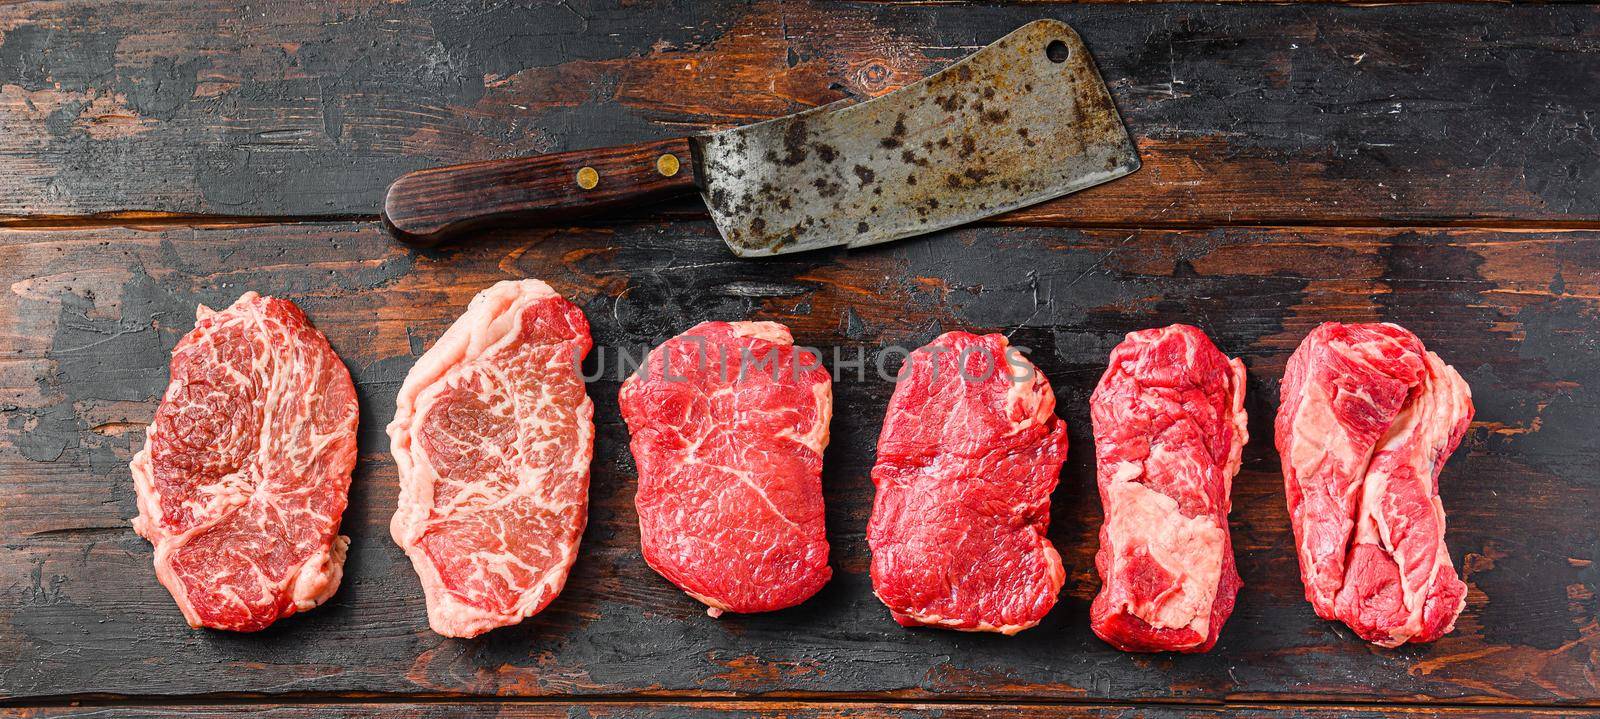 A set of different types of raw beef steaks:top blade, rump, chuck eye roll over old wooden background top view with butcher cleaver. by Ilianesolenyi